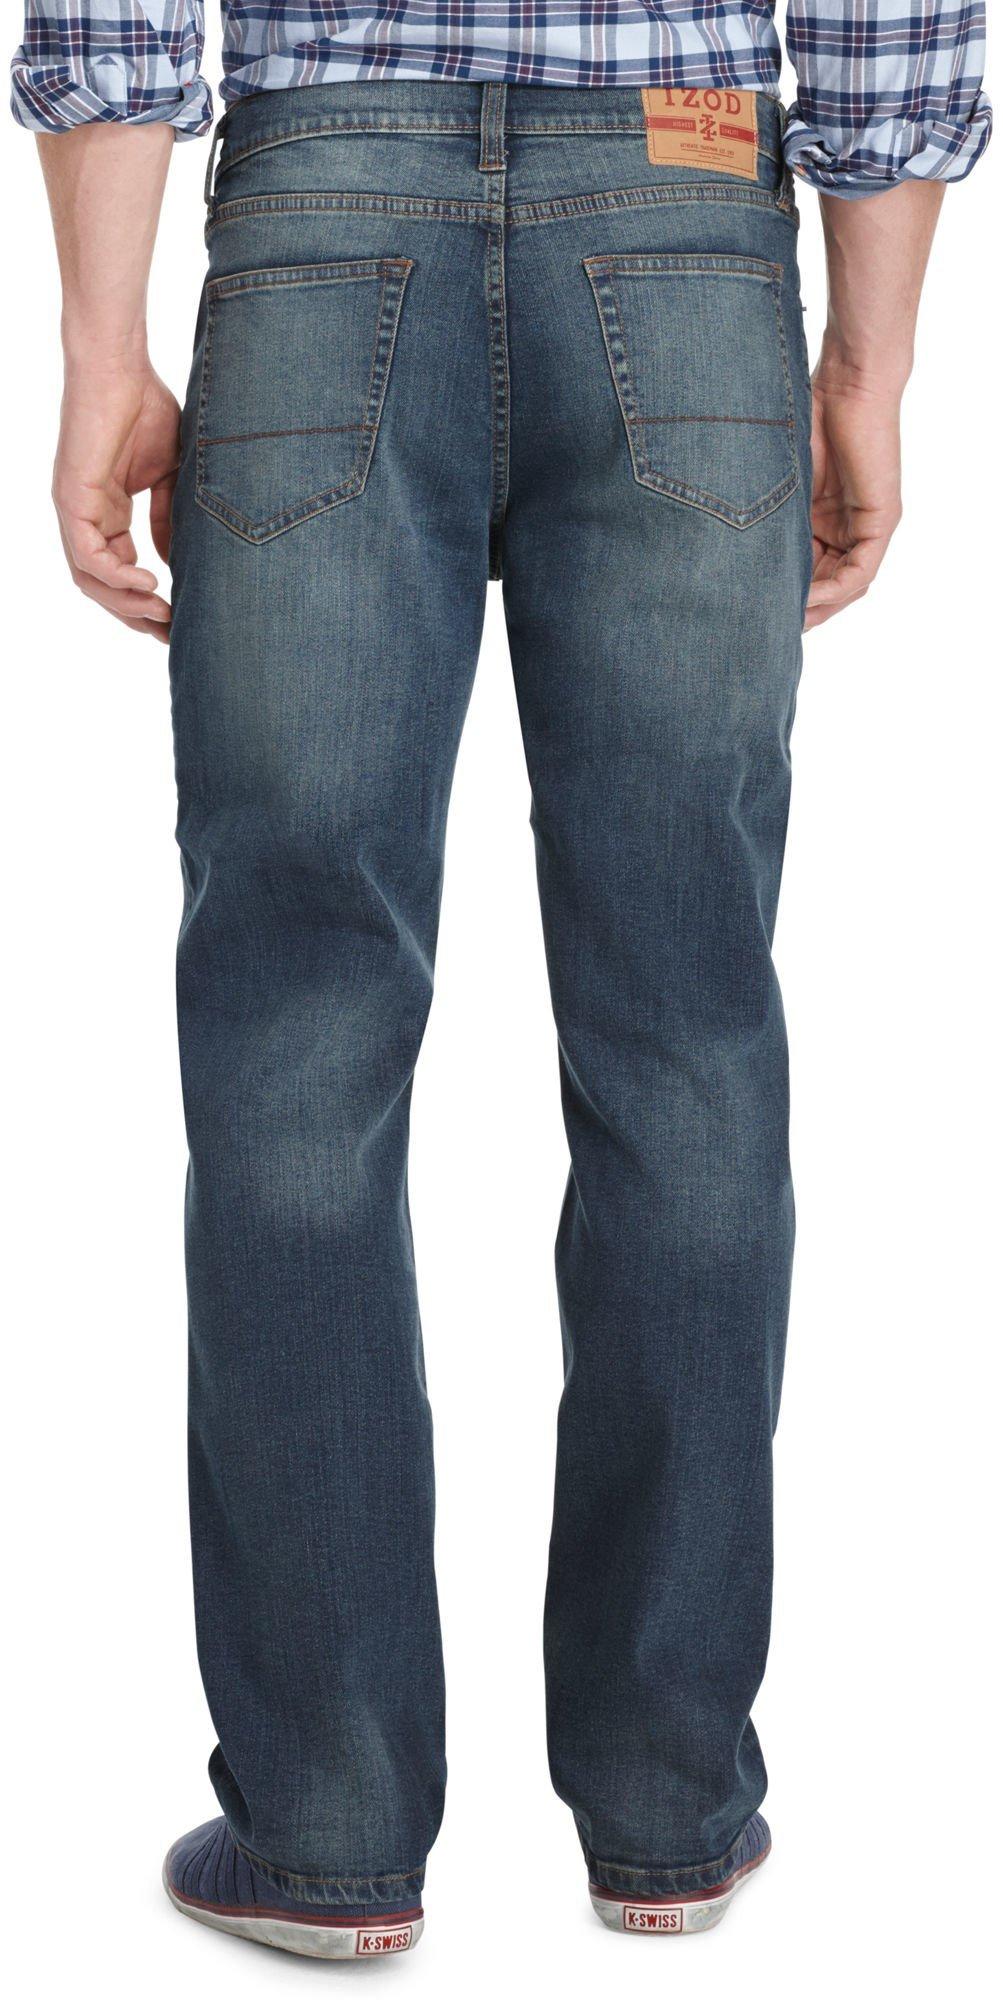 izod men's comfort stretch relaxed fit jean